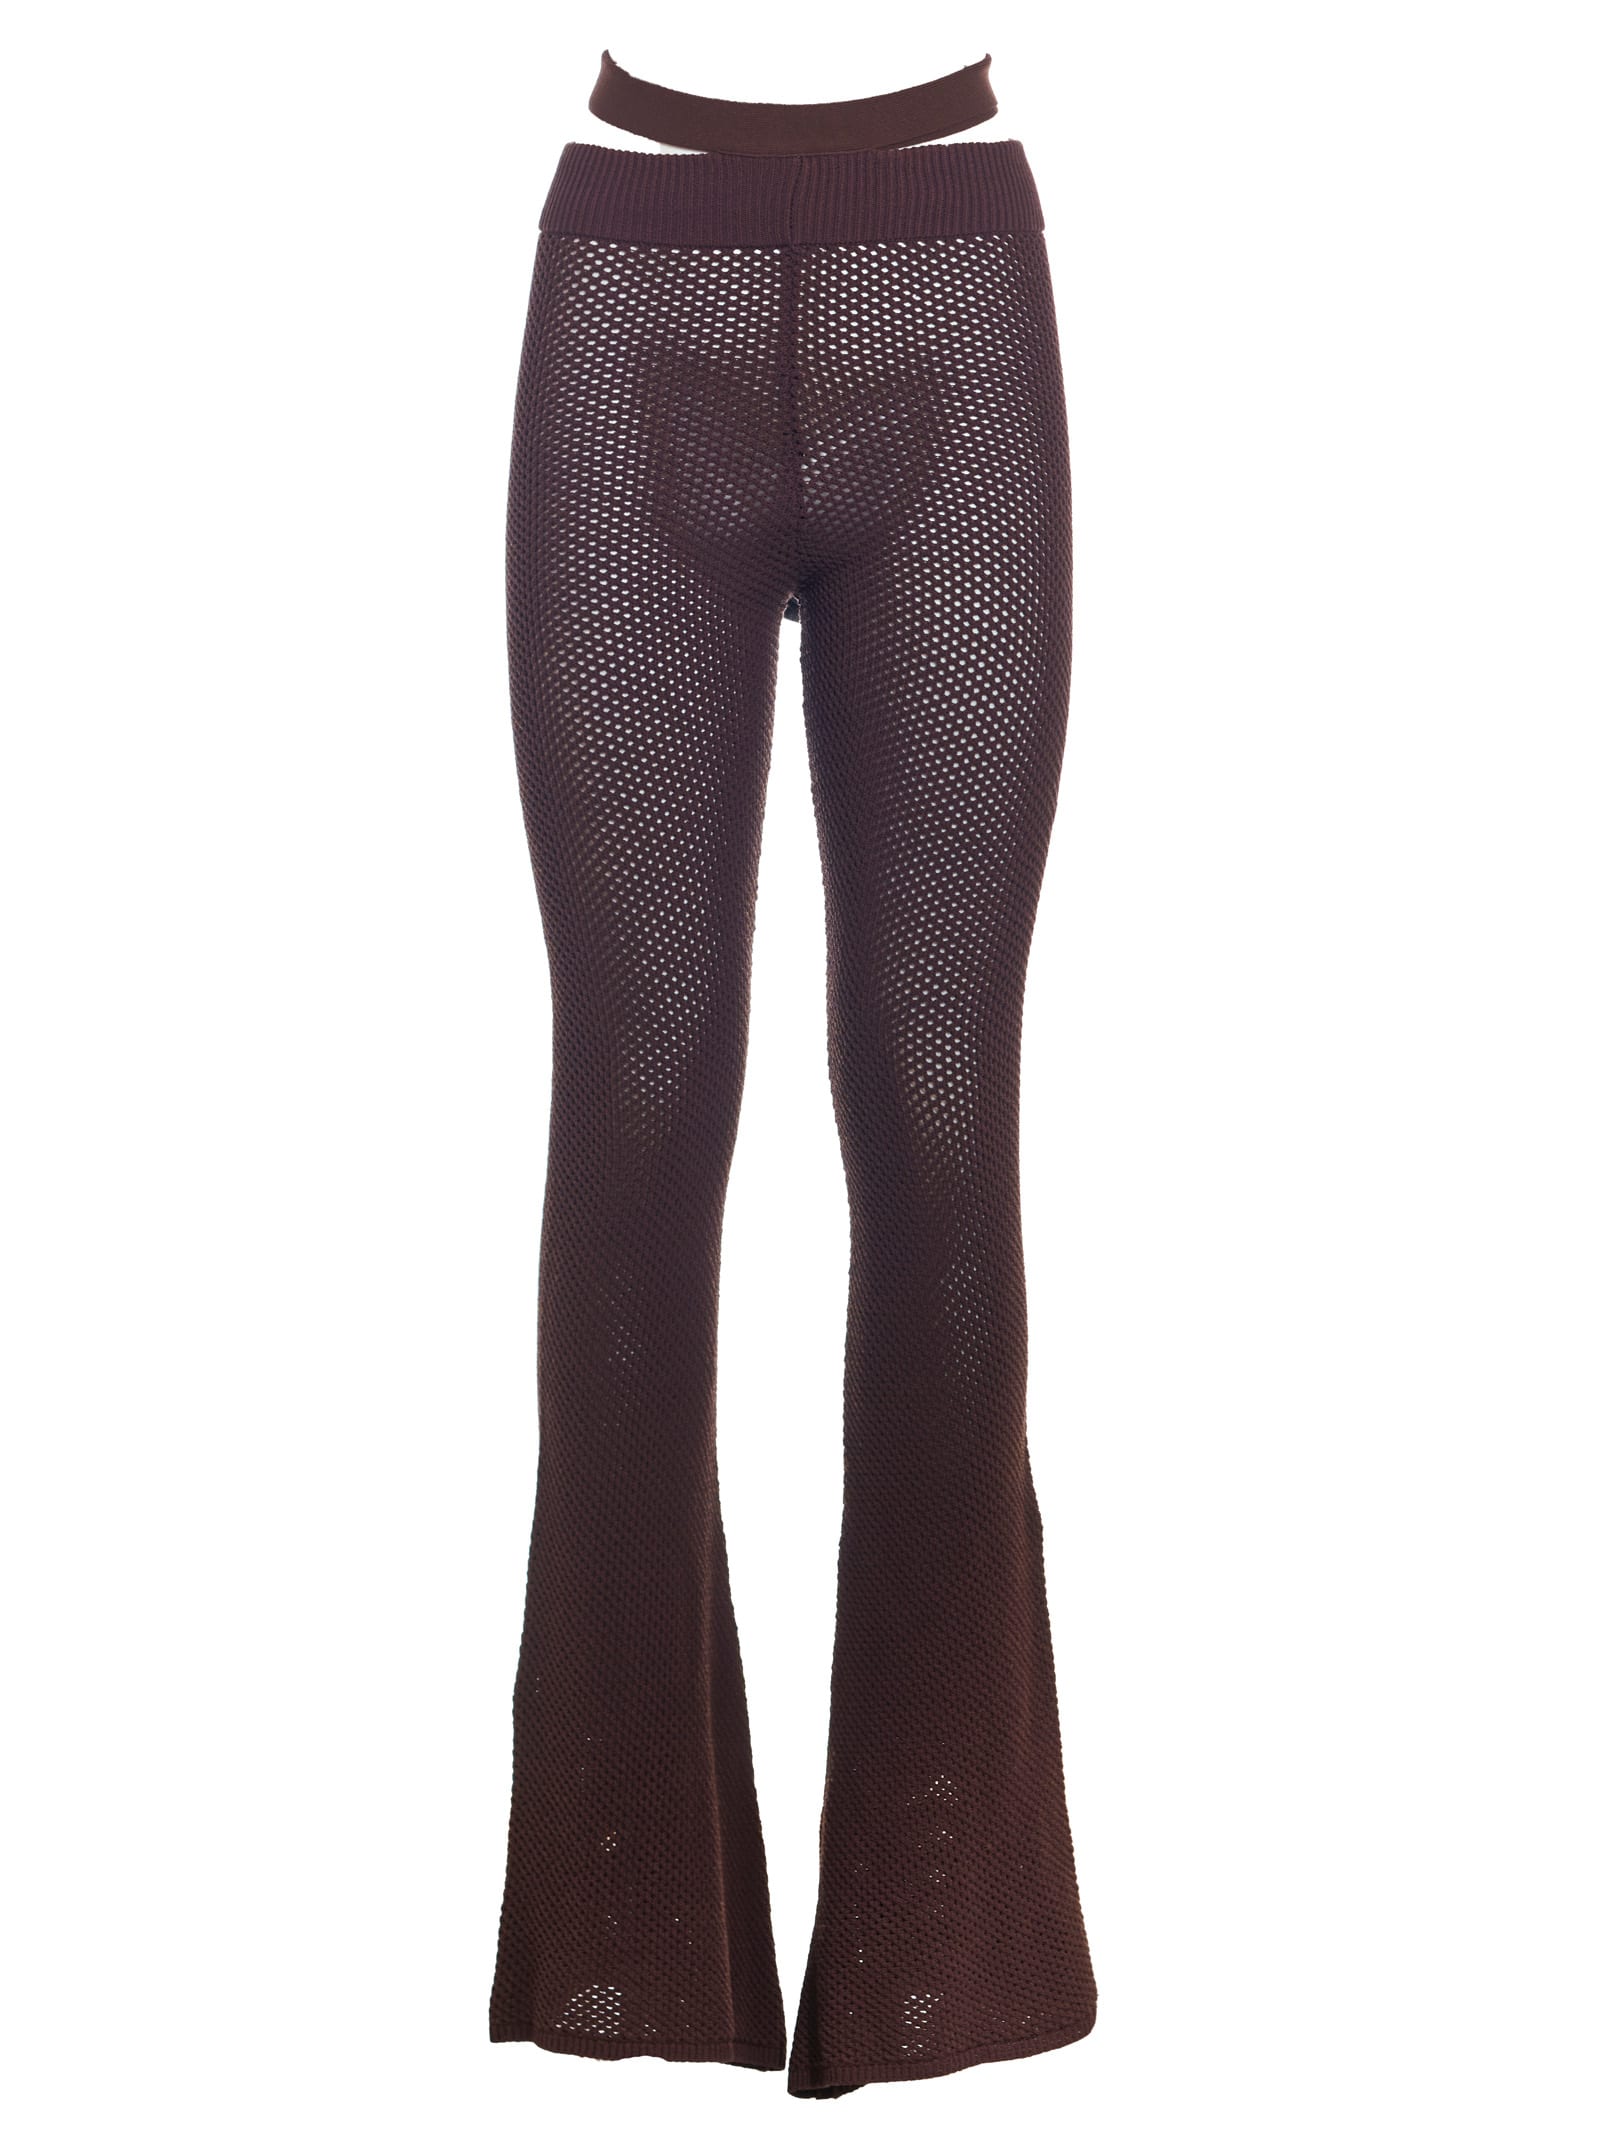 ANDREADAMO Fishnet Knit Pants With Cut Out Belt